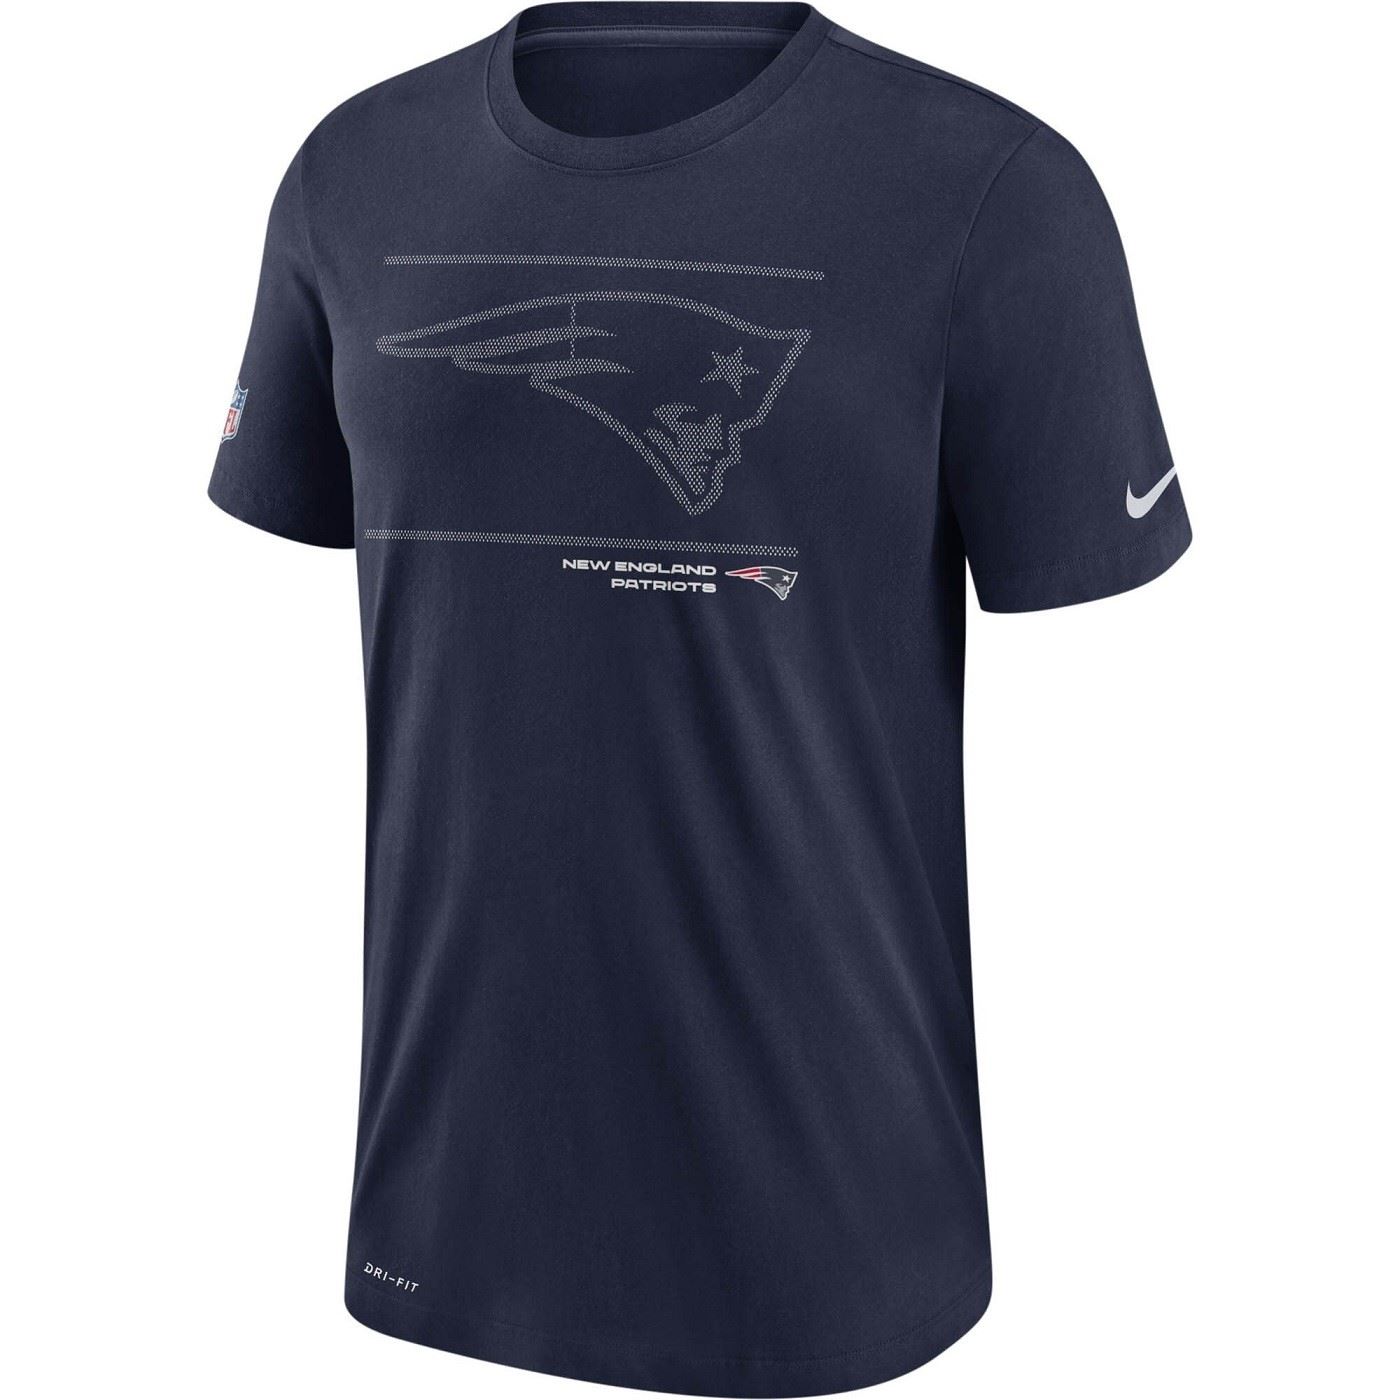 New England Patriots NFL DFCT Team Issue Tee Navy T-Shirt Nike